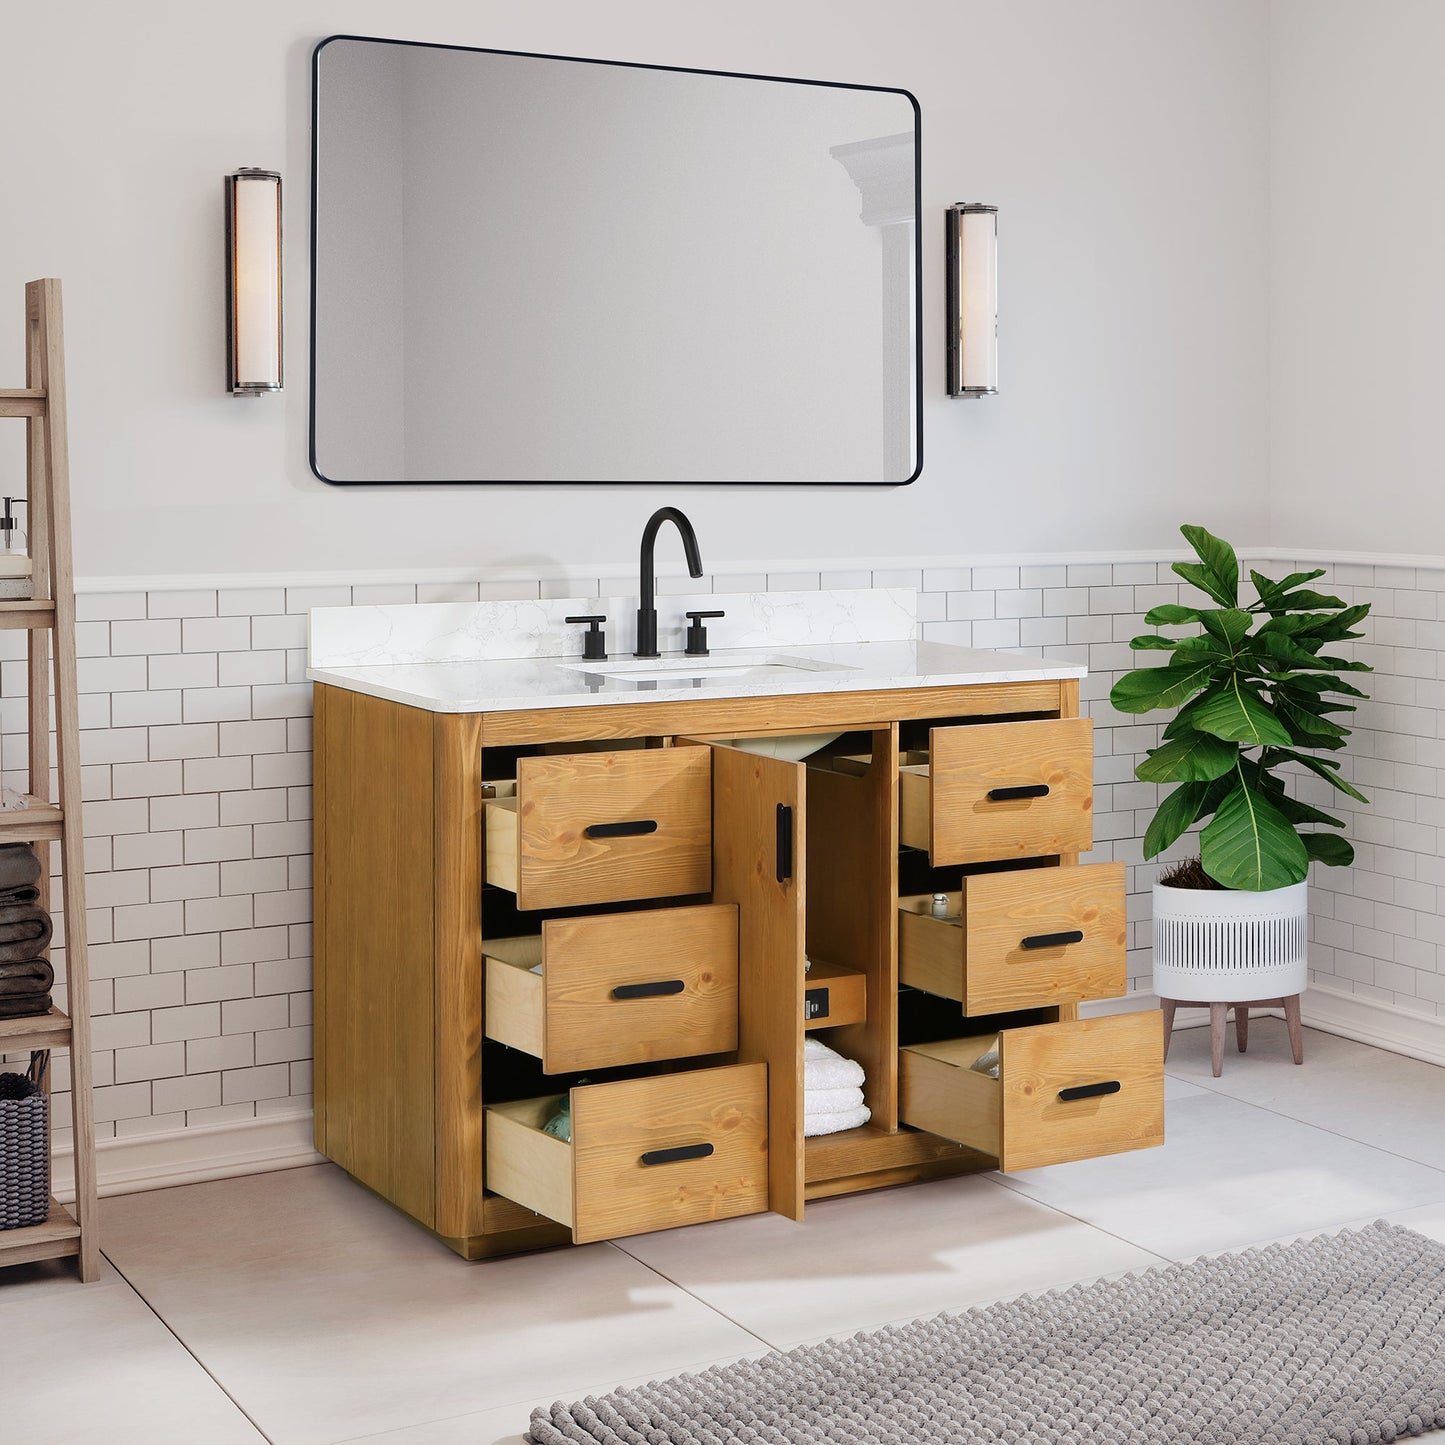 Perla 48" Single Bathroom Vanity in Natural Wood with Grain White Composite Stone Countertop with Mirror